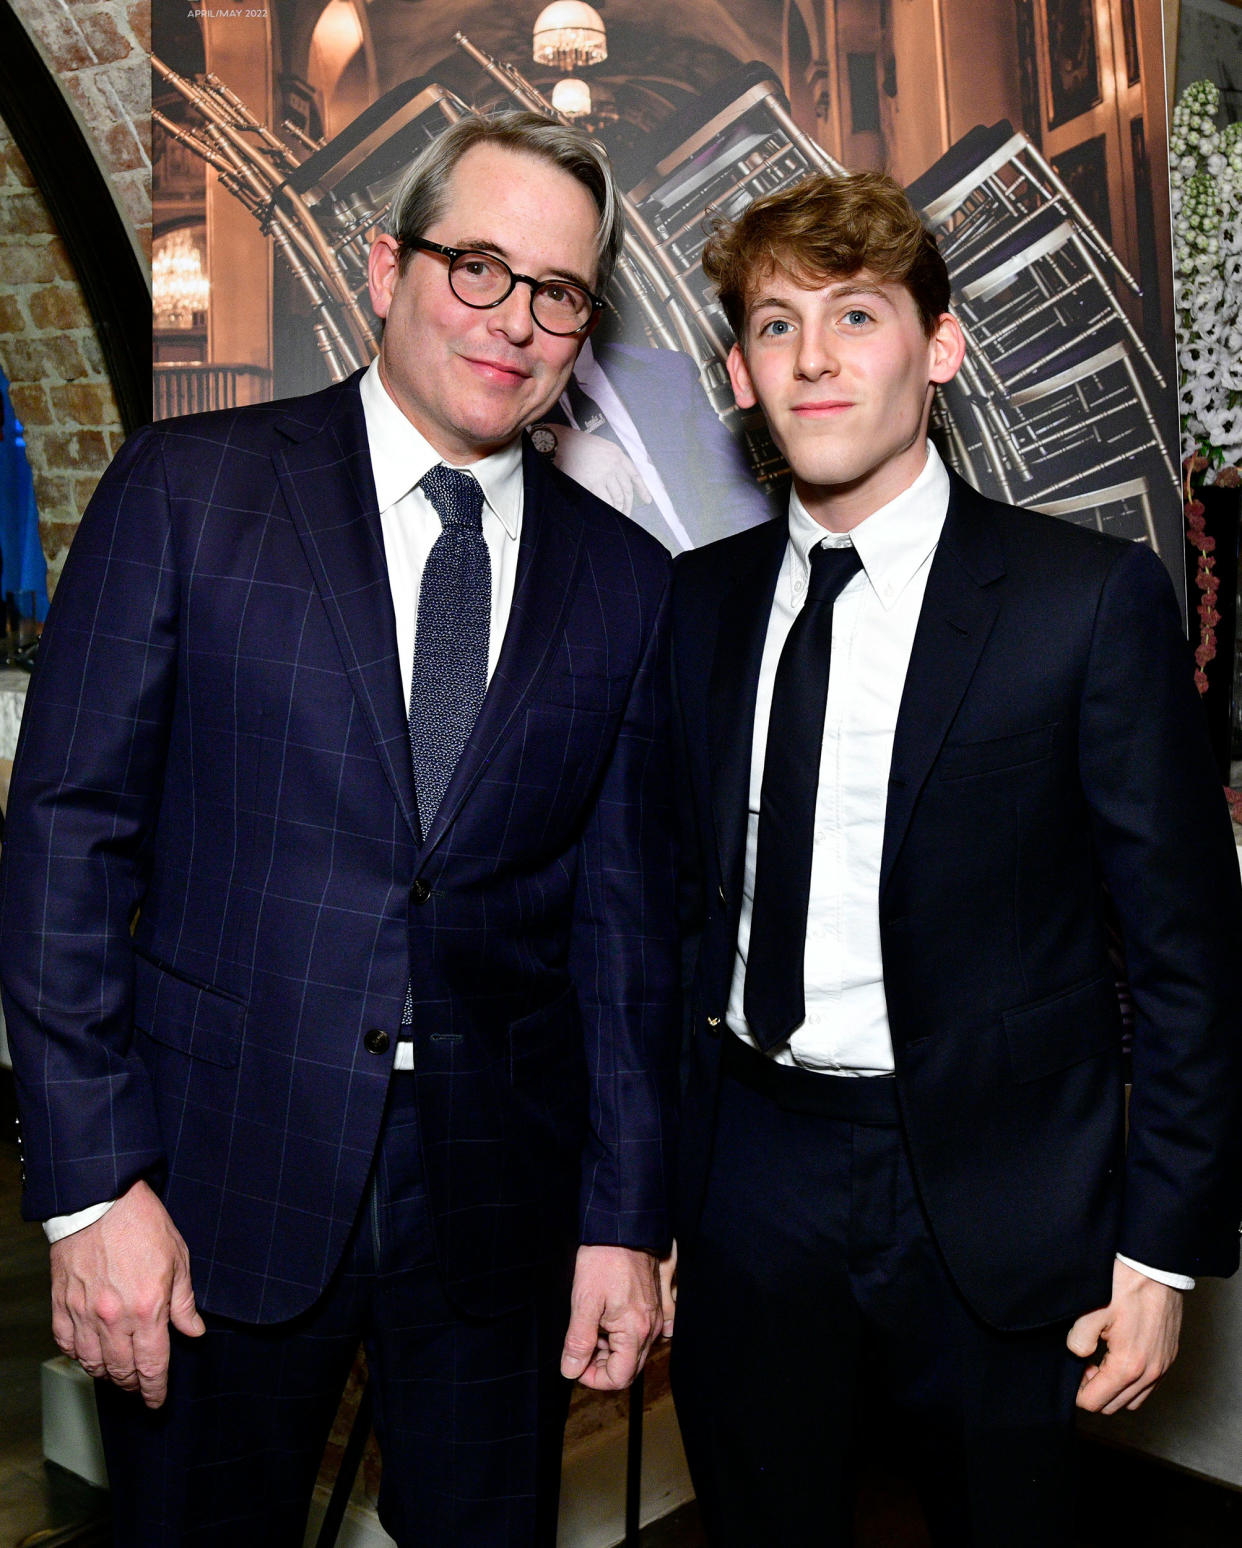 Matthew Broderick and his 19-year-old son, James Wilkie, attended an event in New York City on June 13. (Eugene Gologursky / Getty Images)